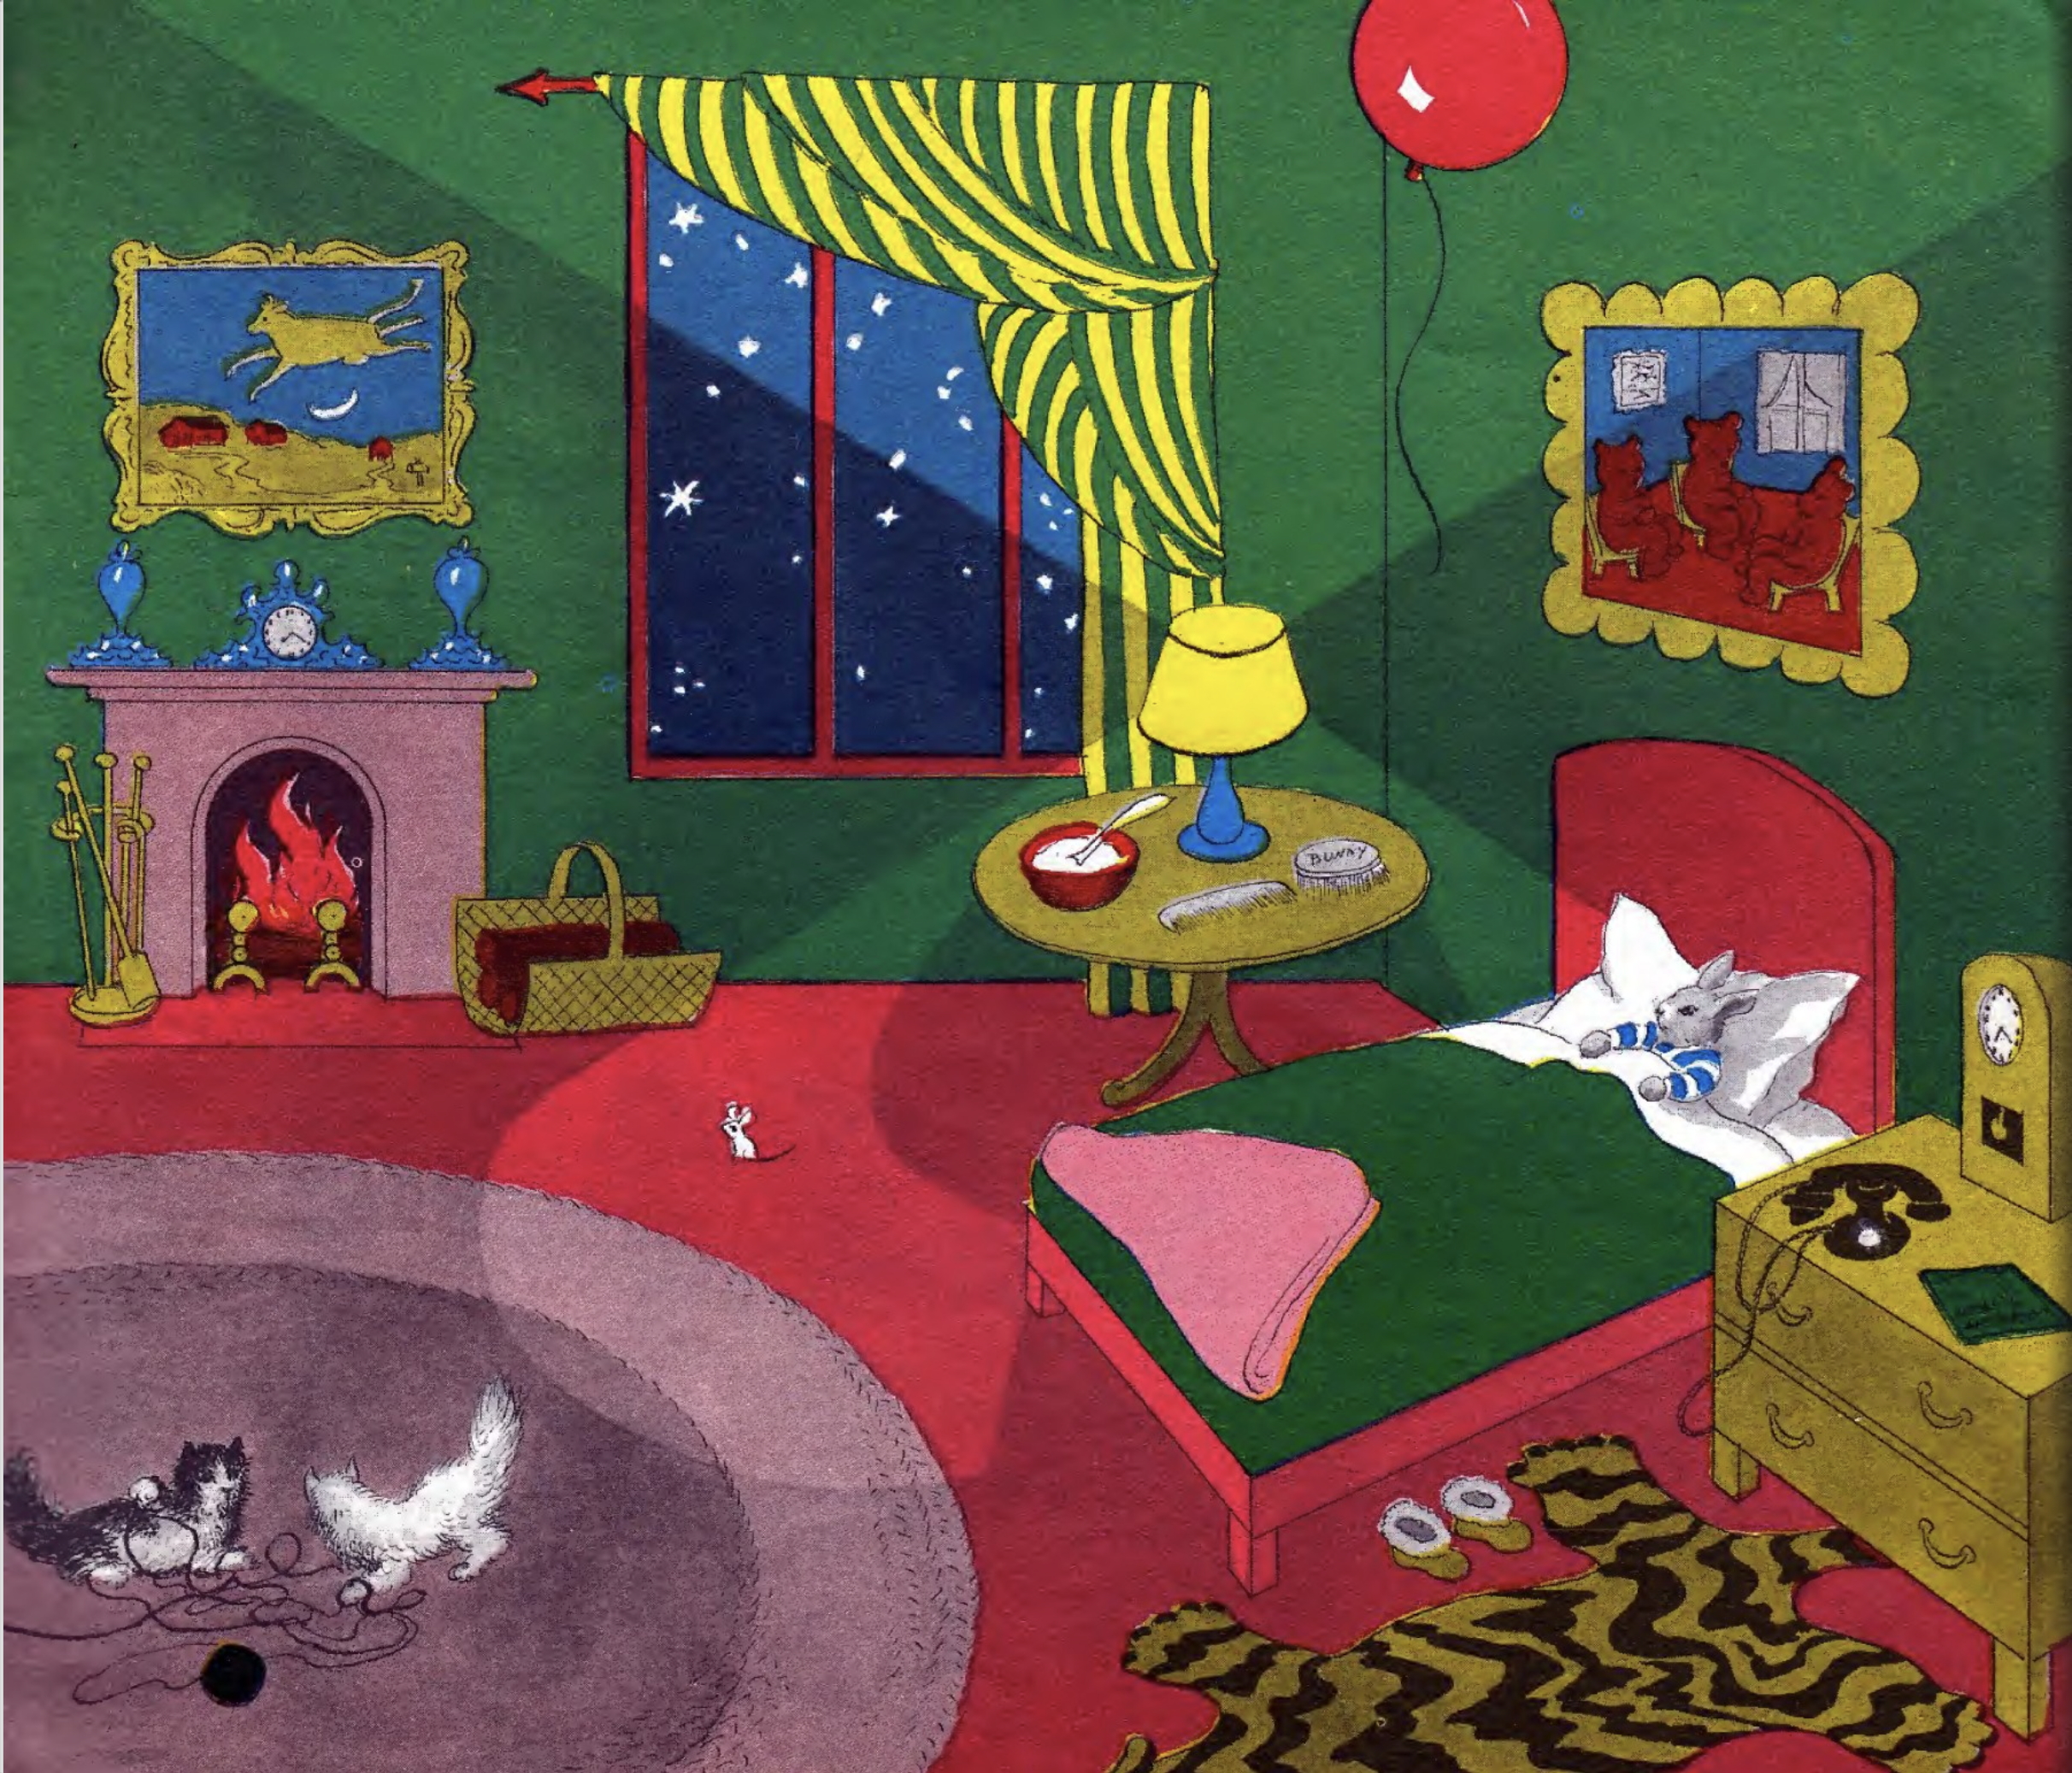 Rear cover of Goodnight Moon